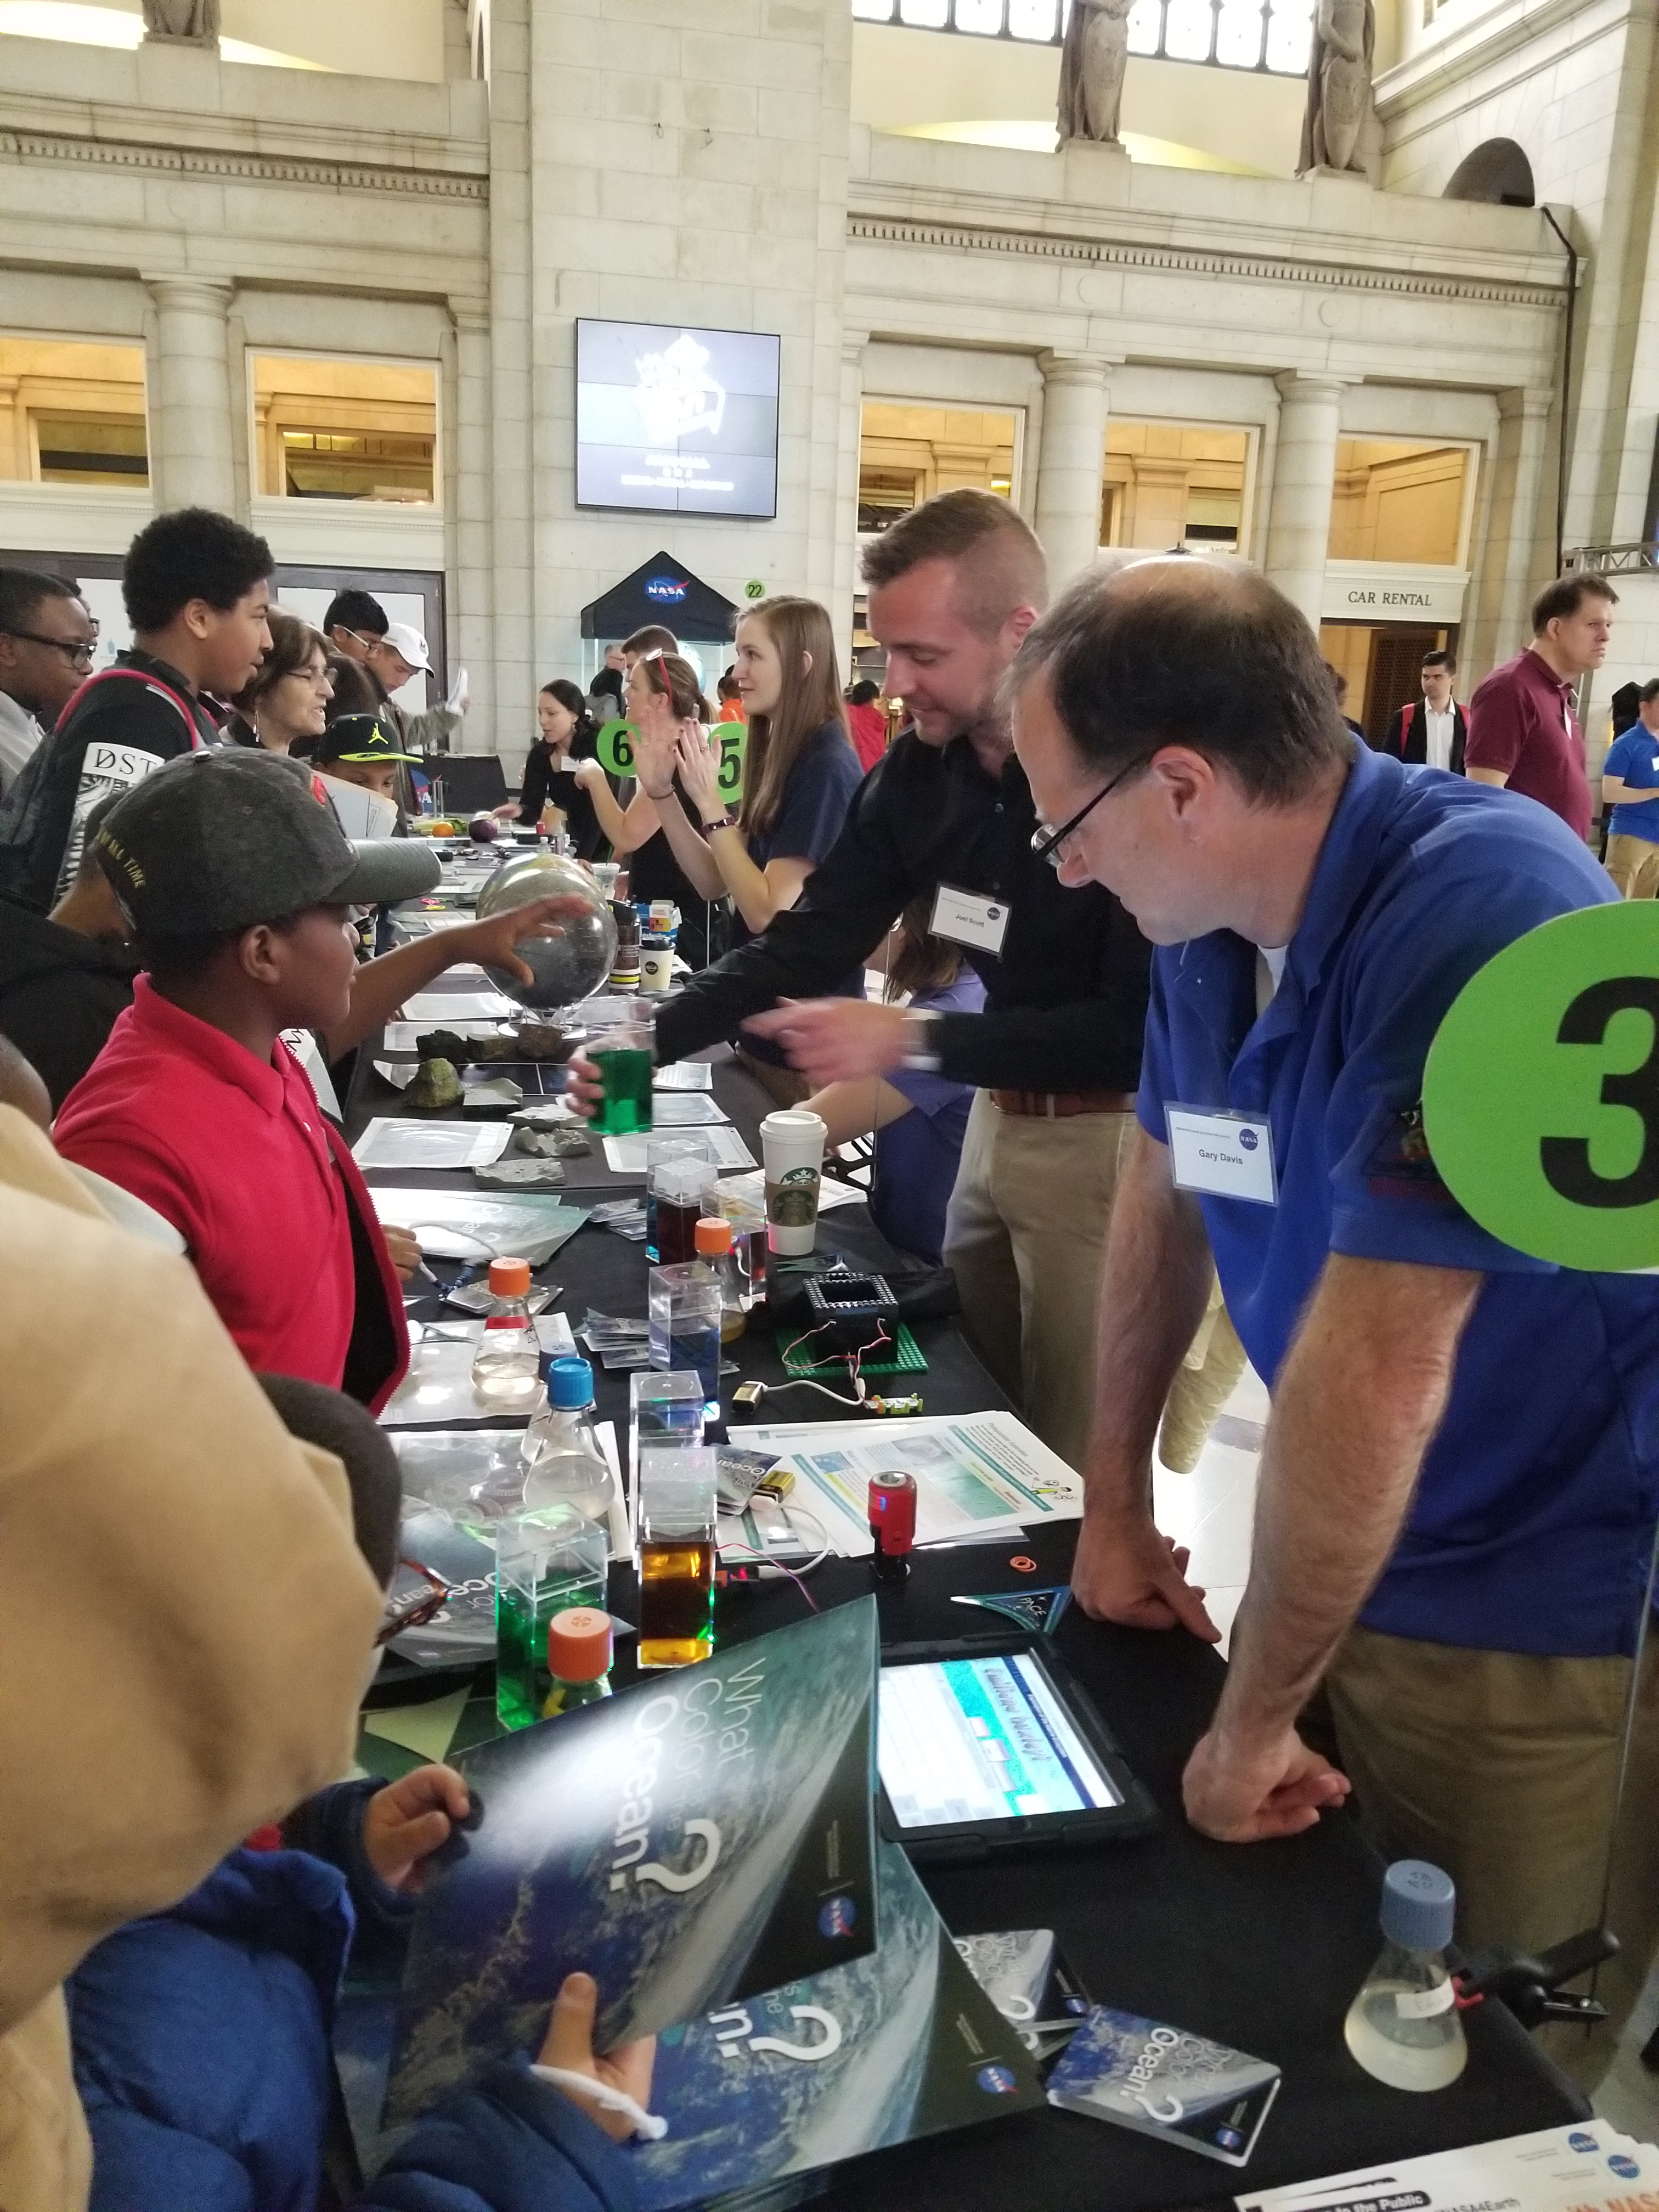 Visitors at the NASA Earth Day Celebration at Union Station (Washington D.C.) check out water with different optical properties while learning about PACE ocean color measurements.